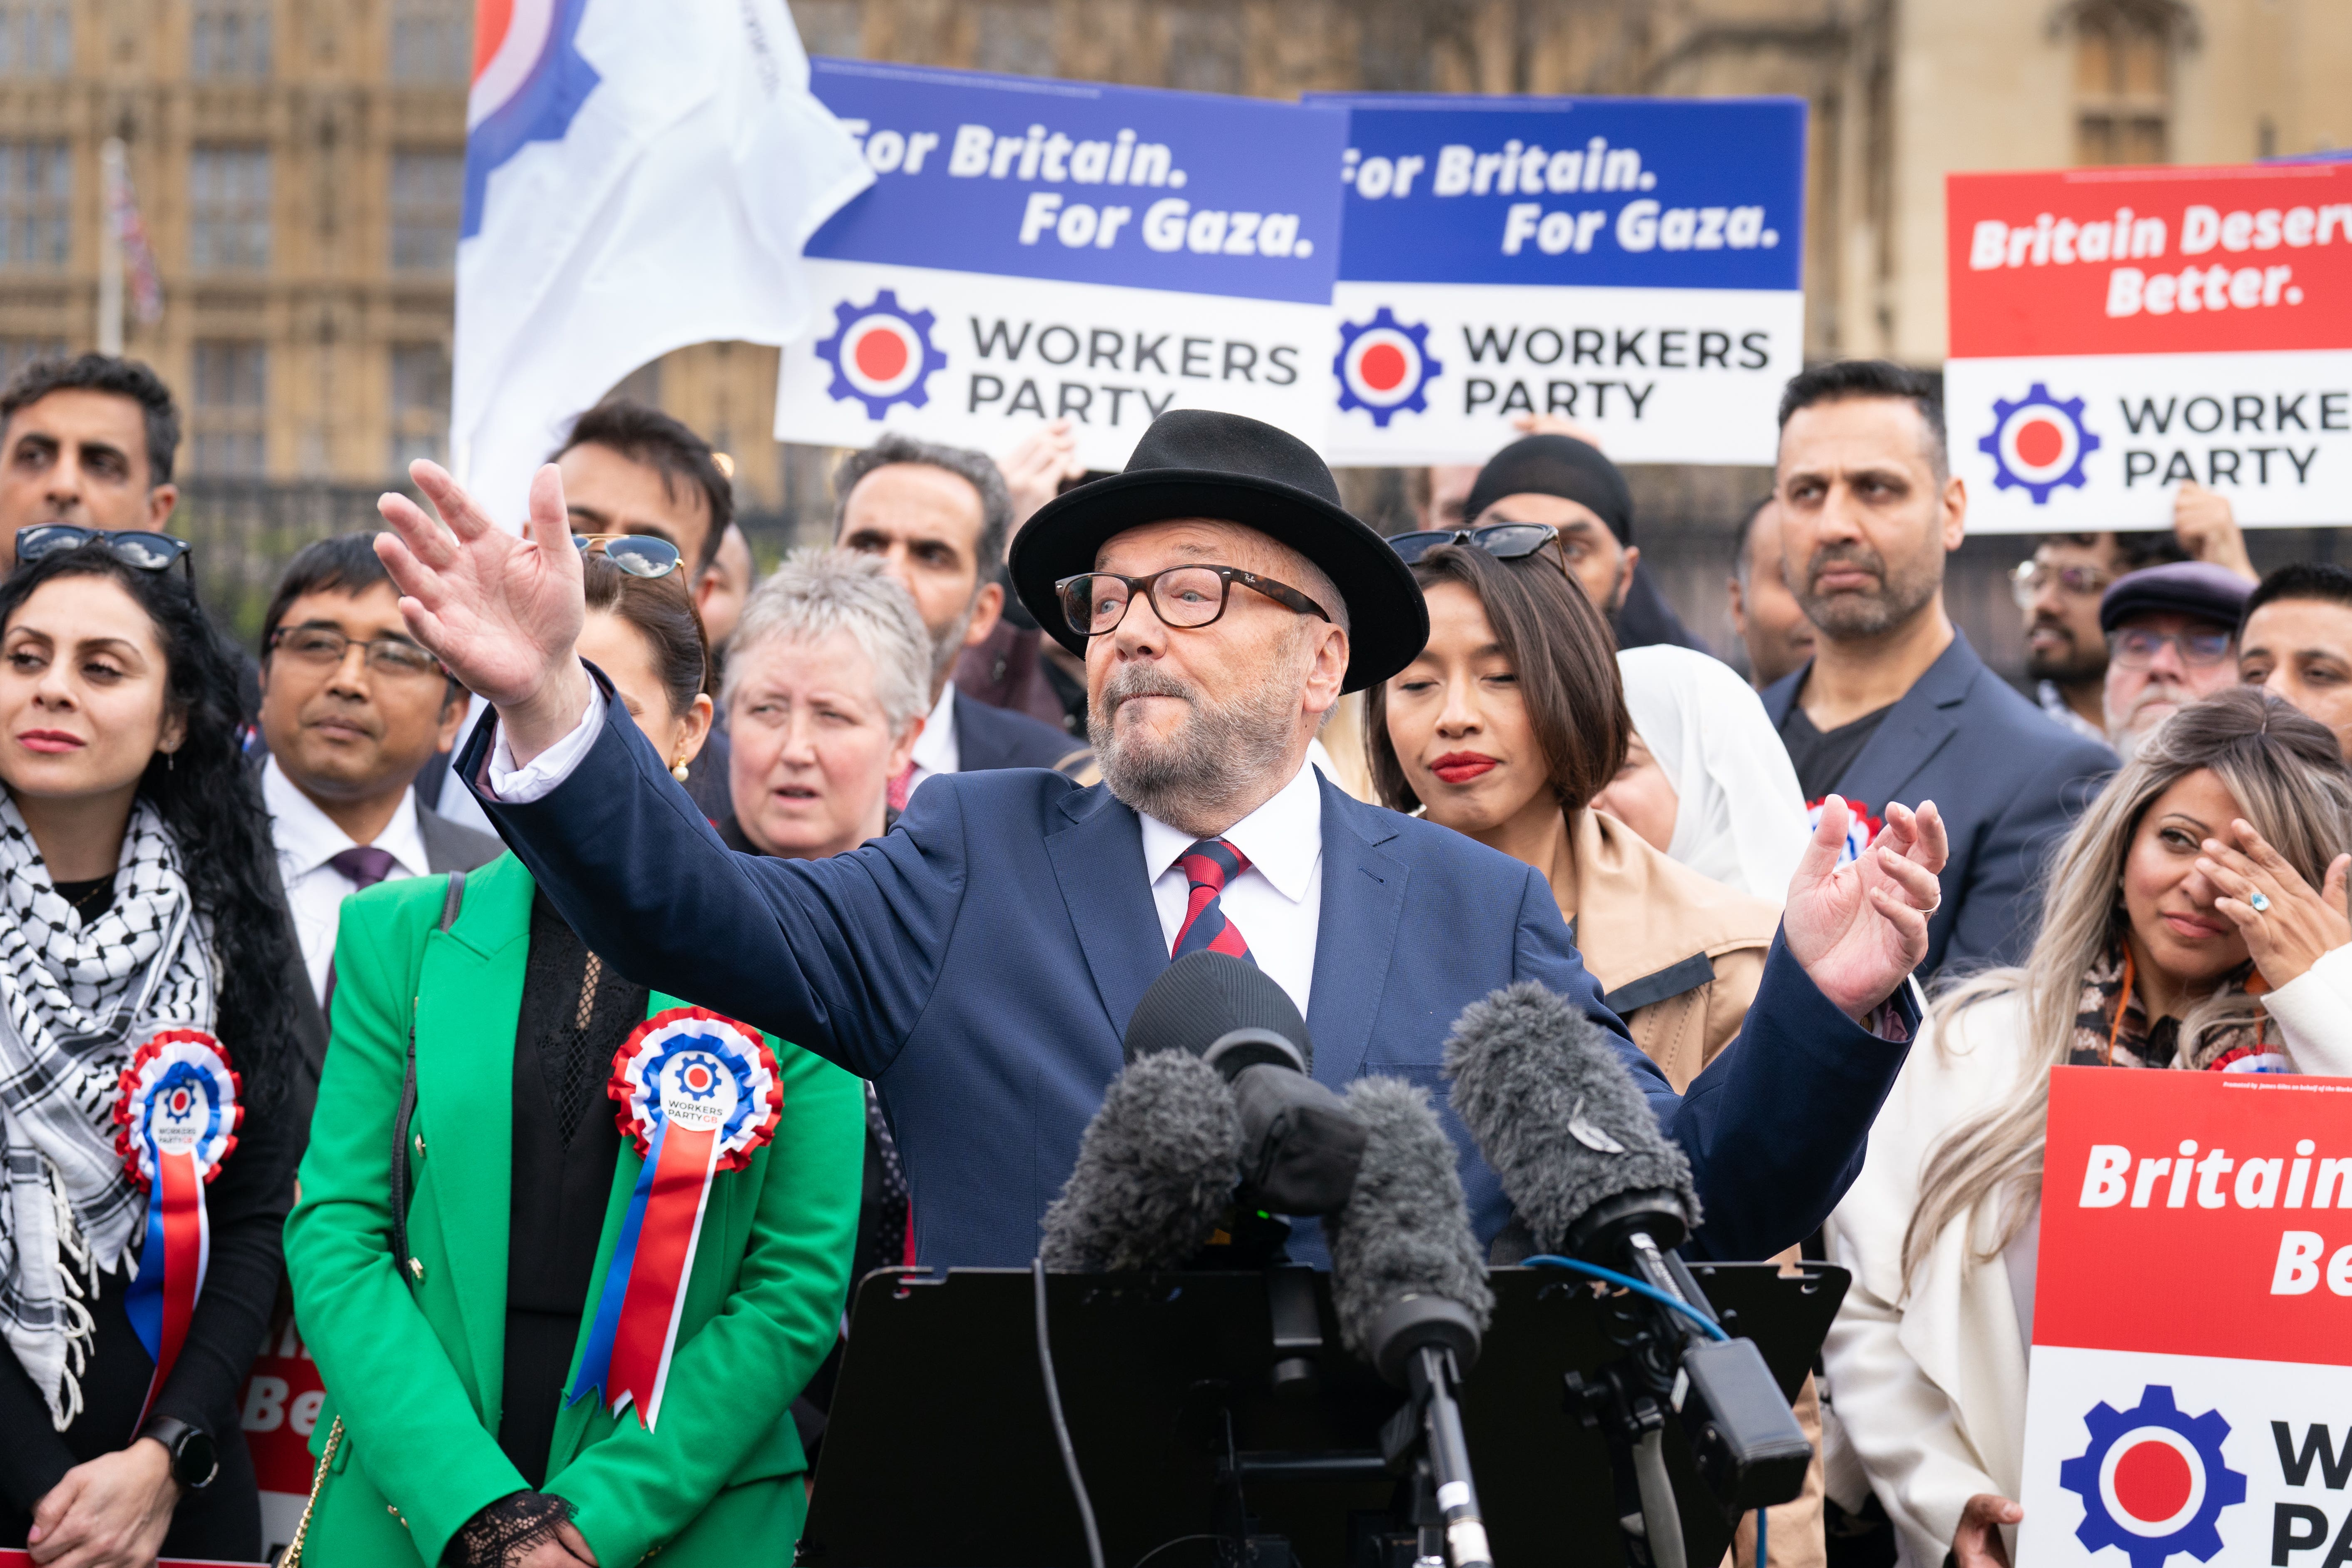 George Galloway was elected to the seat in a by-election in February